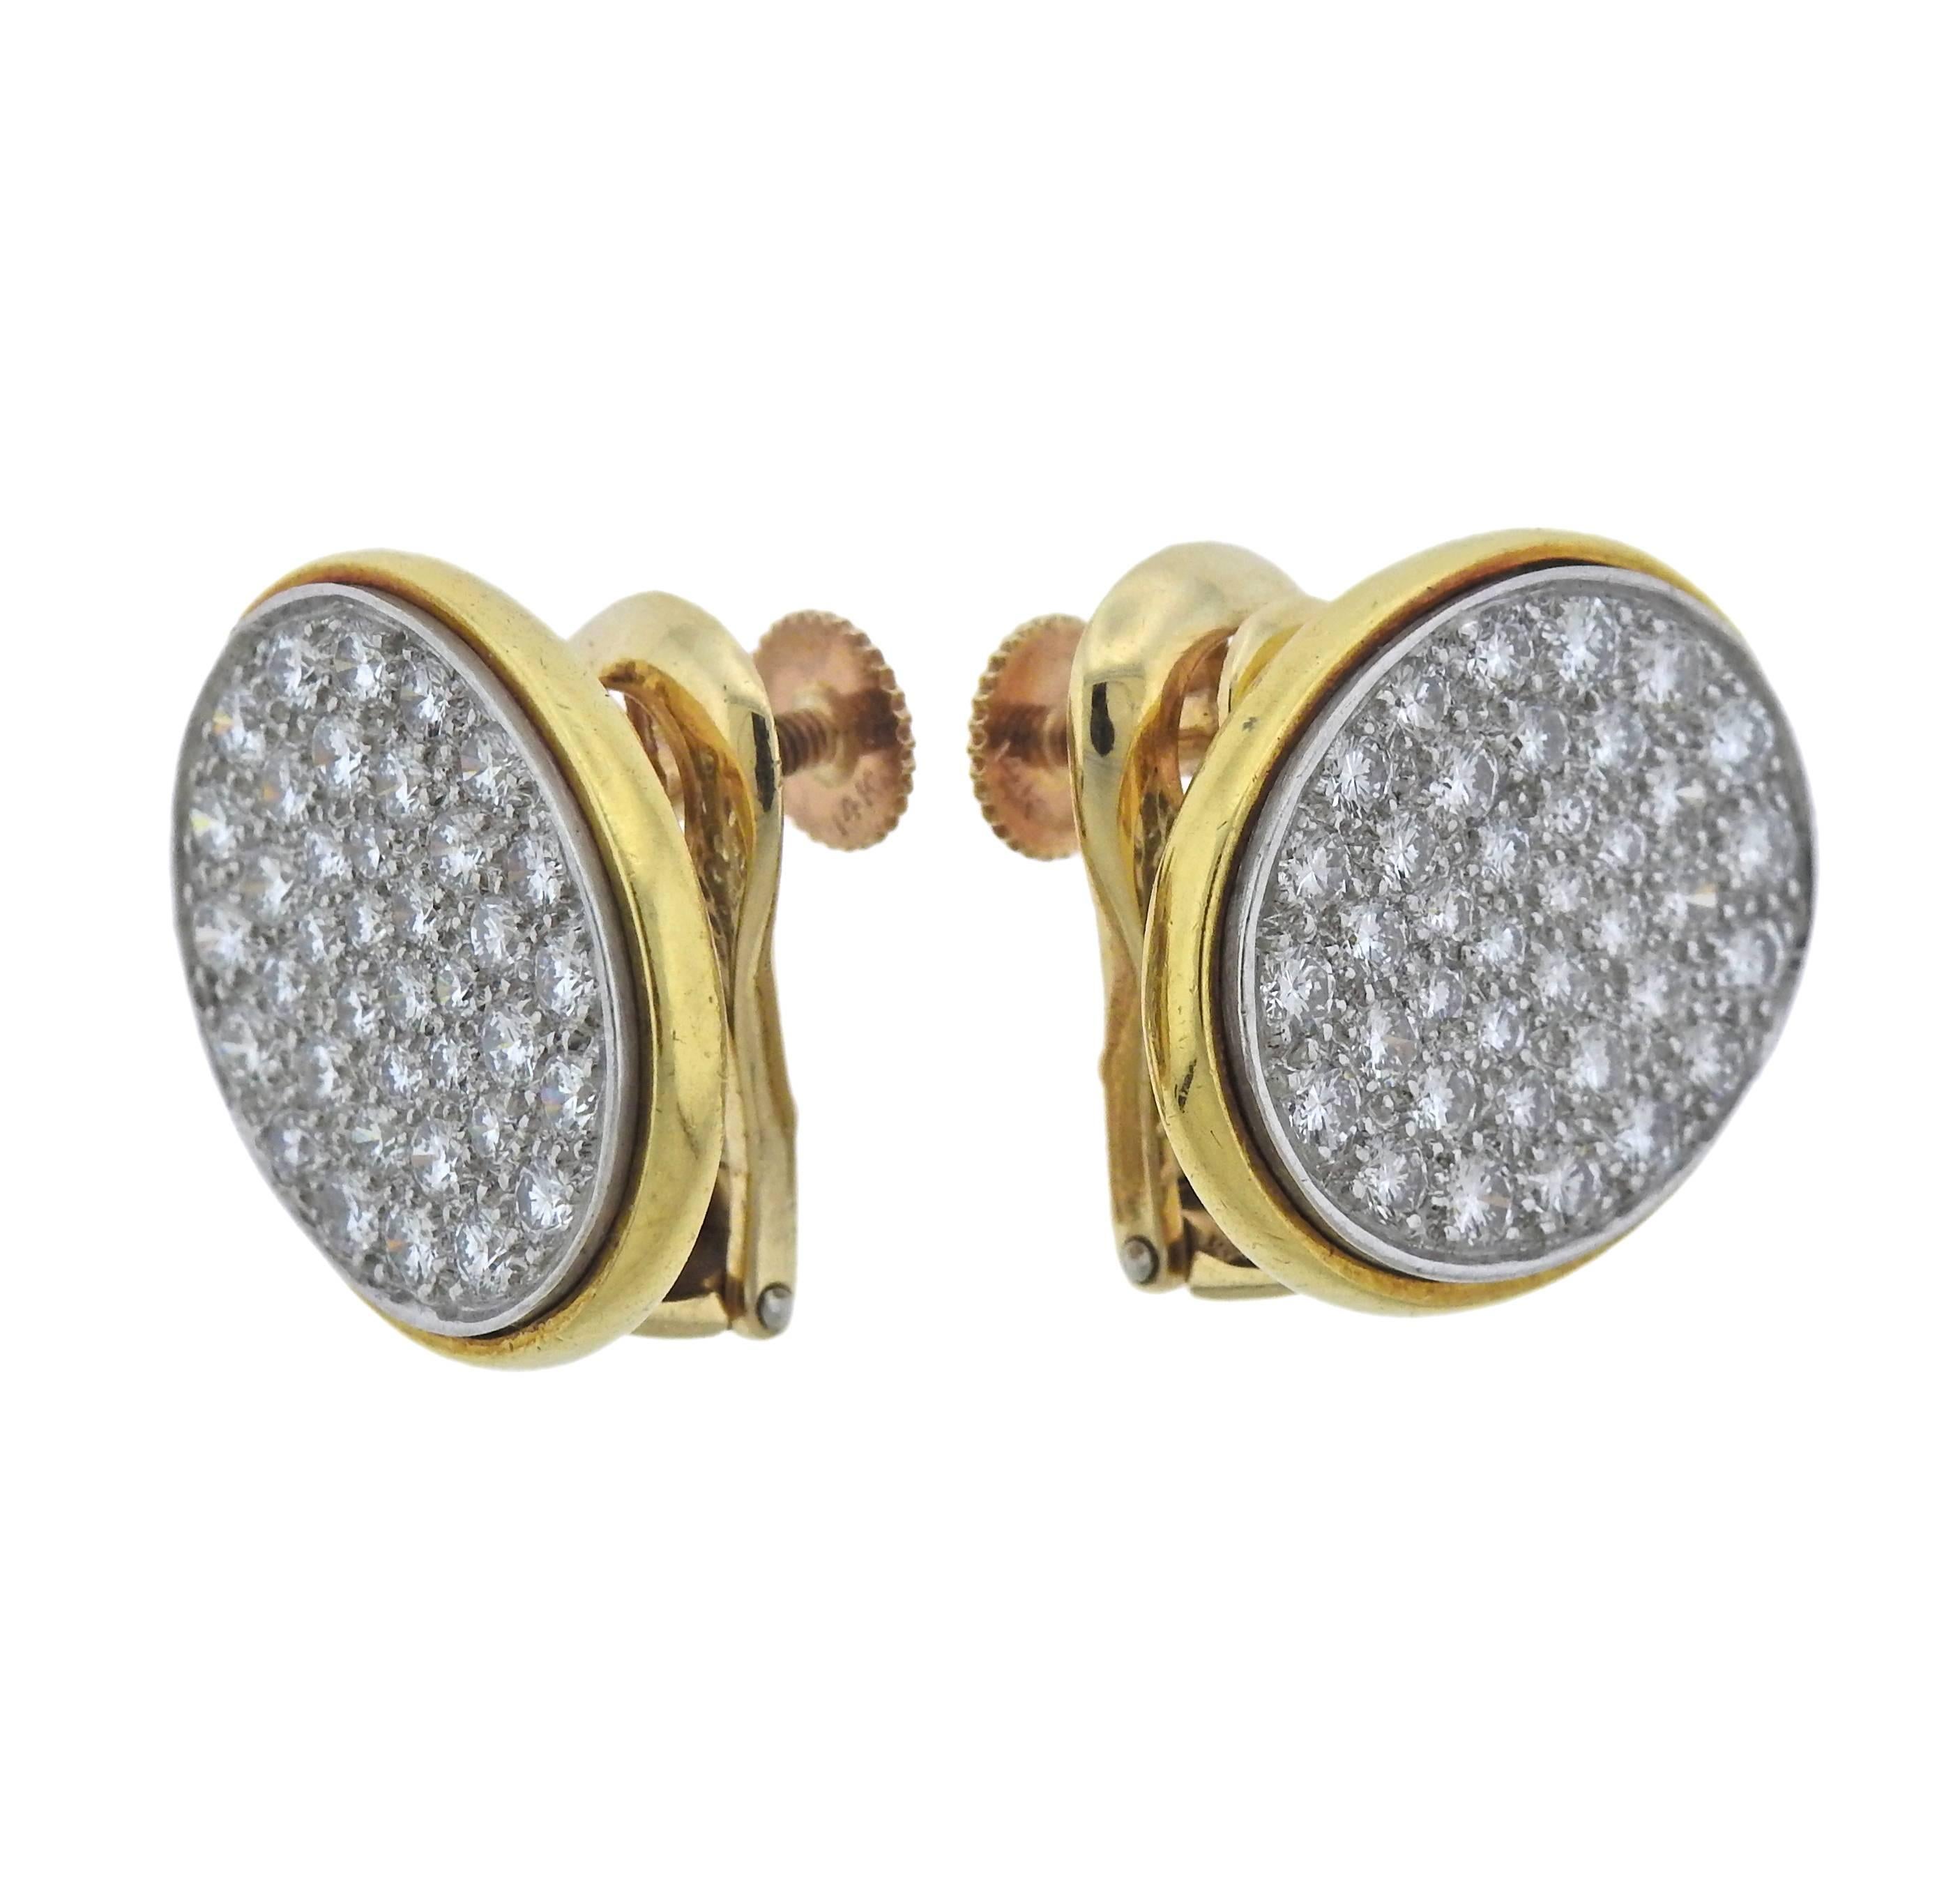 Rare 18k gold and platinum oval earrings, designed by Dinh Van for Cartier, set with approximately 2.00ctw in G./VS diamonds. Earrings are 20mm x 17mm, weigh 19.7 grams. Marked: Cartier, 18k, irid. plat, 64095.